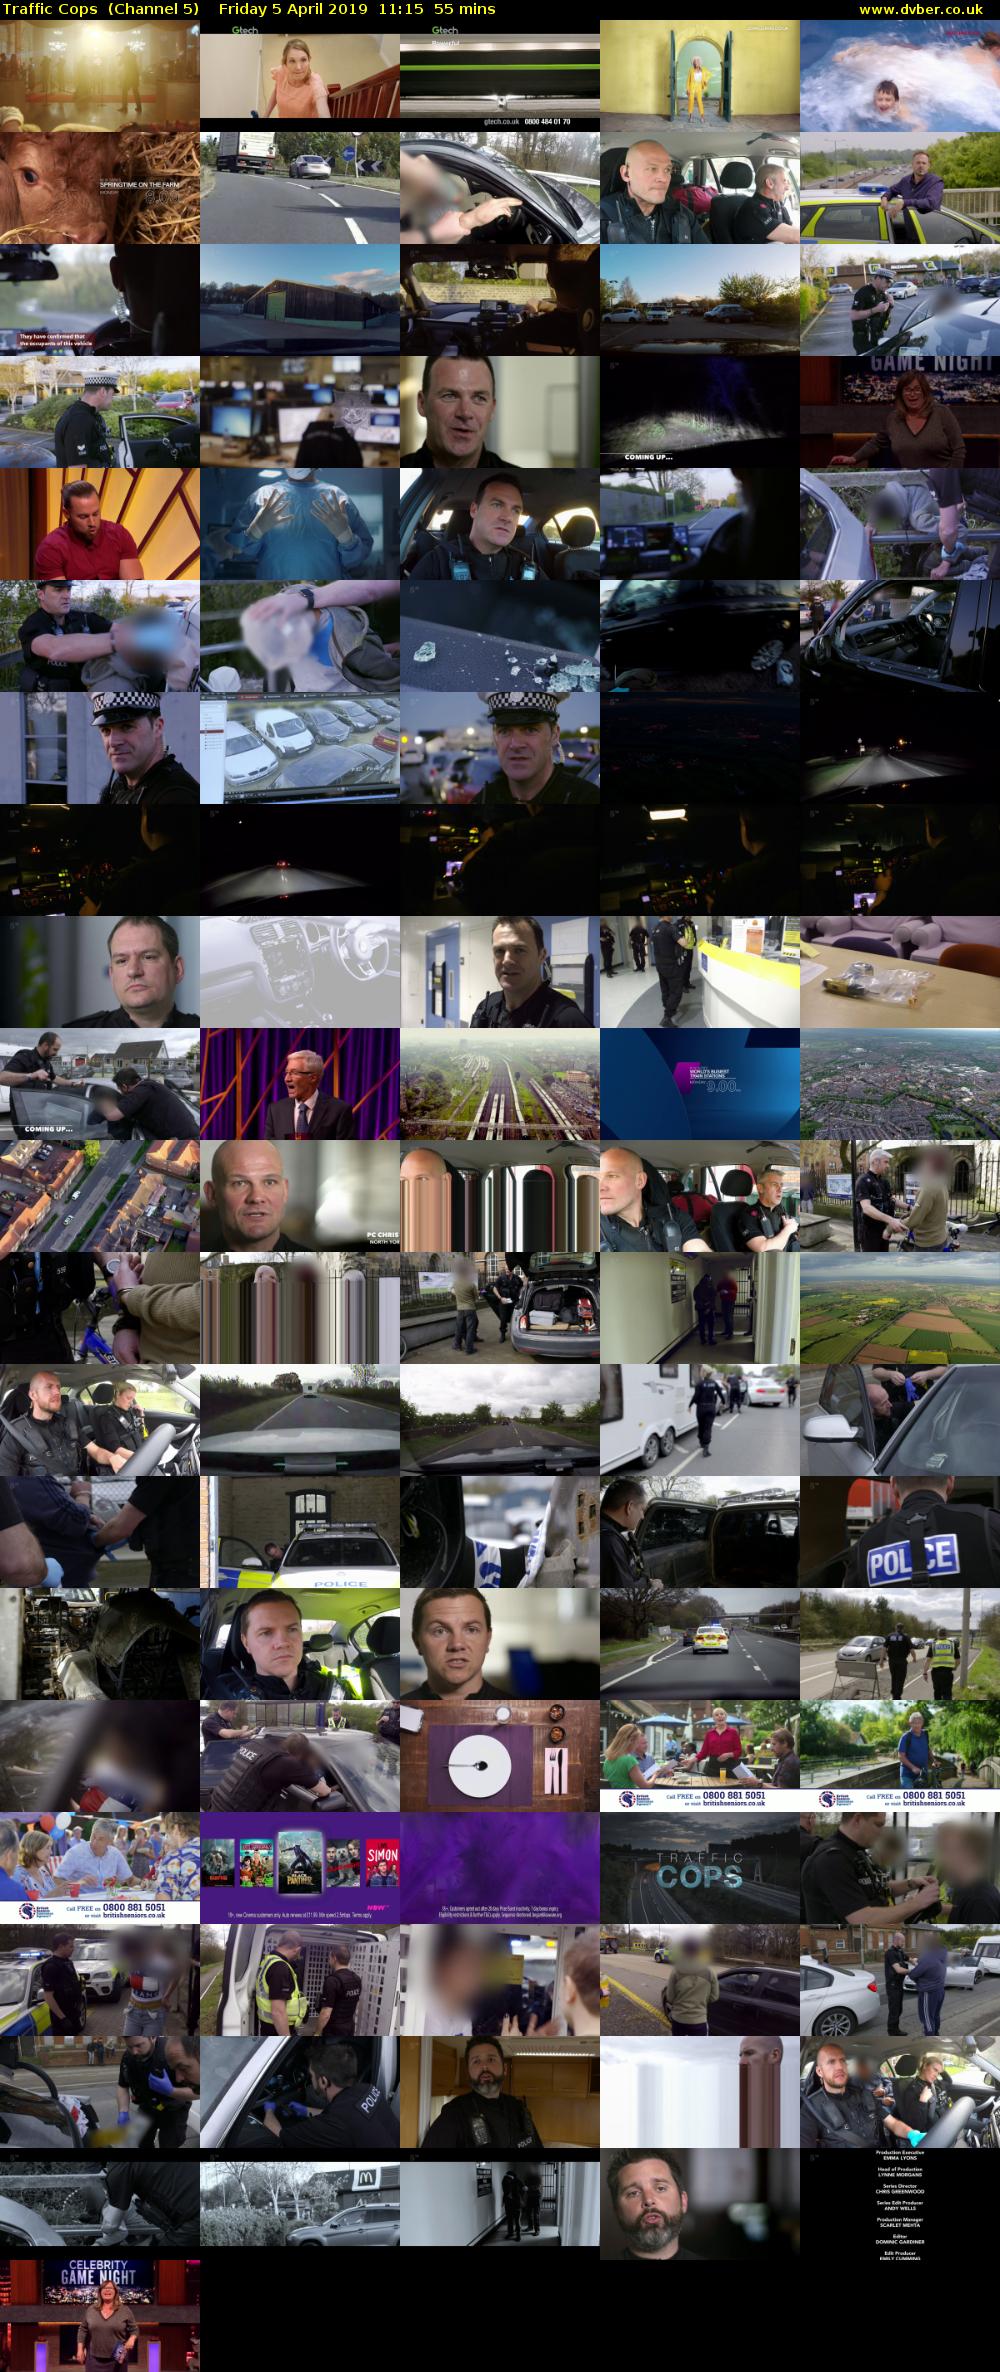 Traffic Cops  (Channel 5) Friday 5 April 2019 11:15 - 12:10